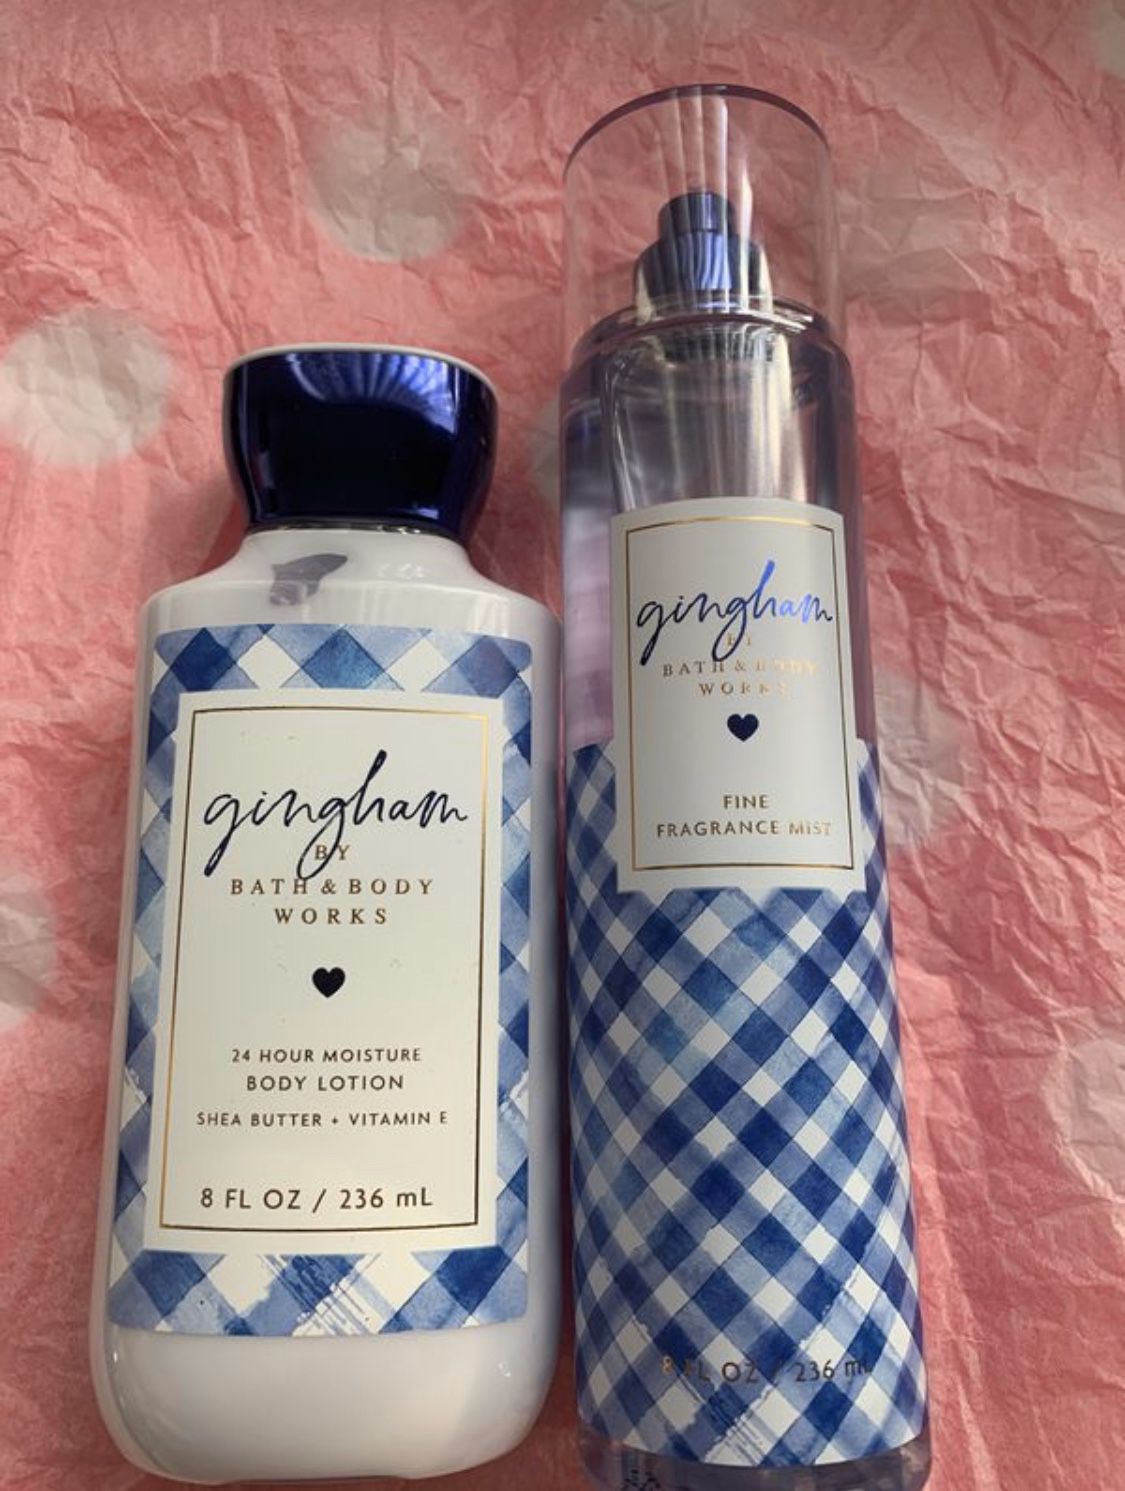 Bath and body works gingham body mist and lotion set for $12